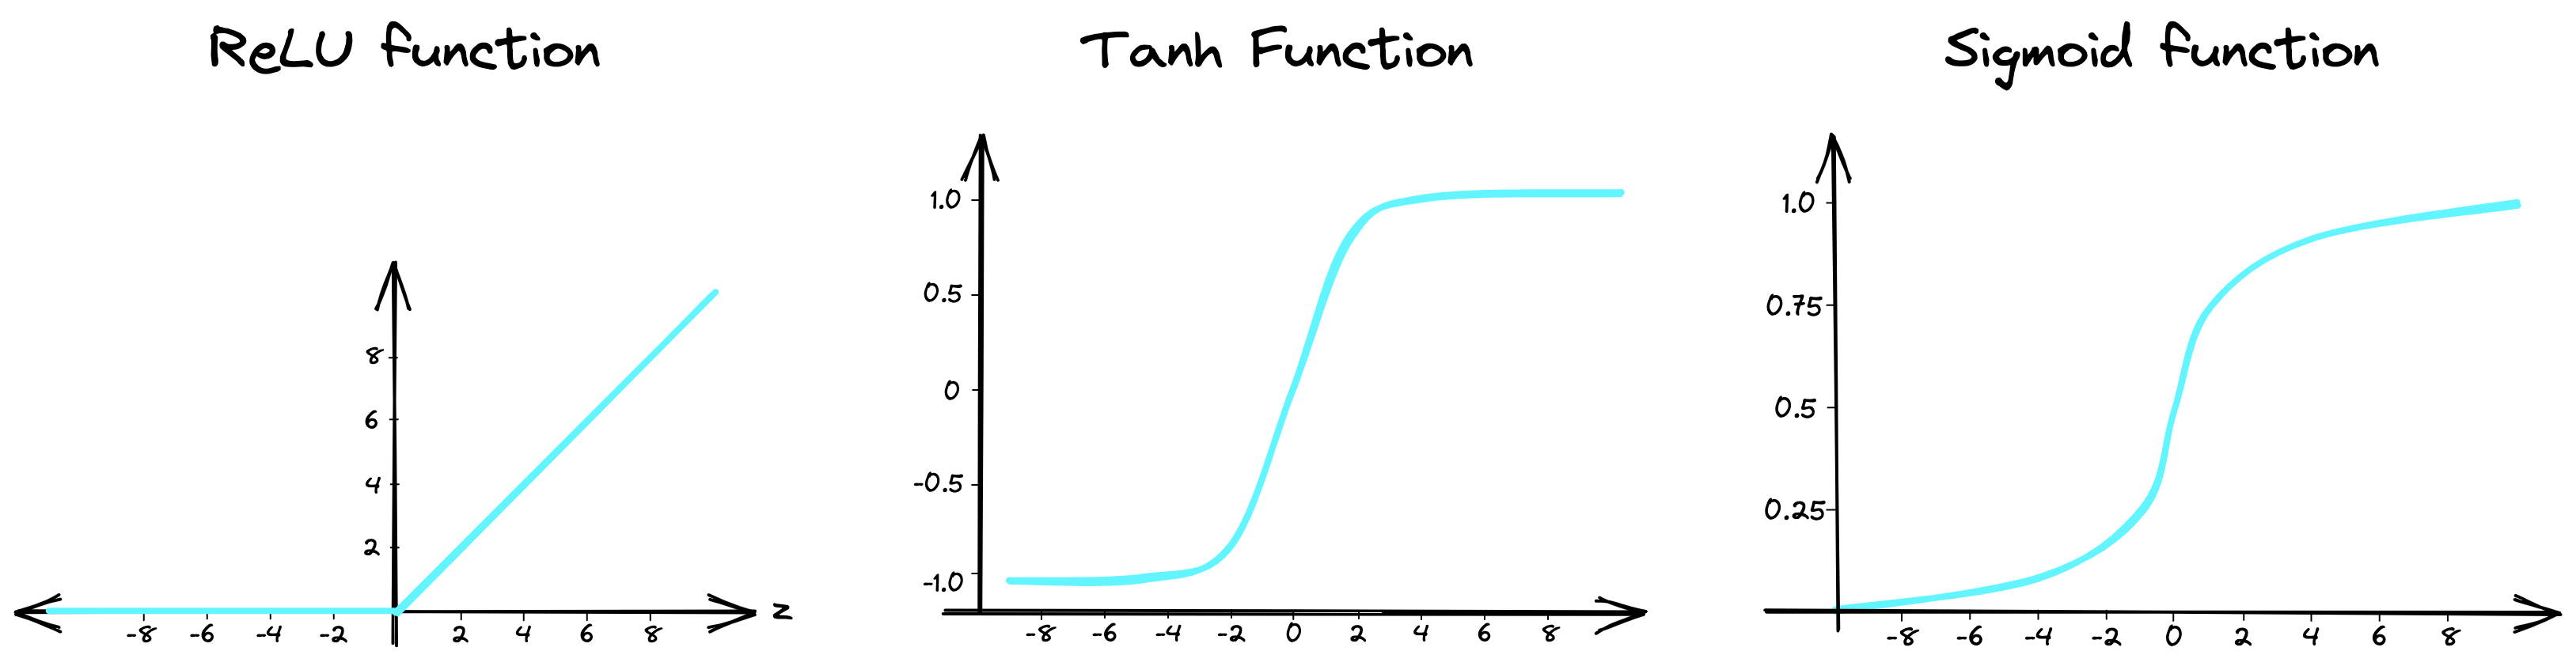 Some of the most popular activation functions; ReLU, tanh, and sigmoid.